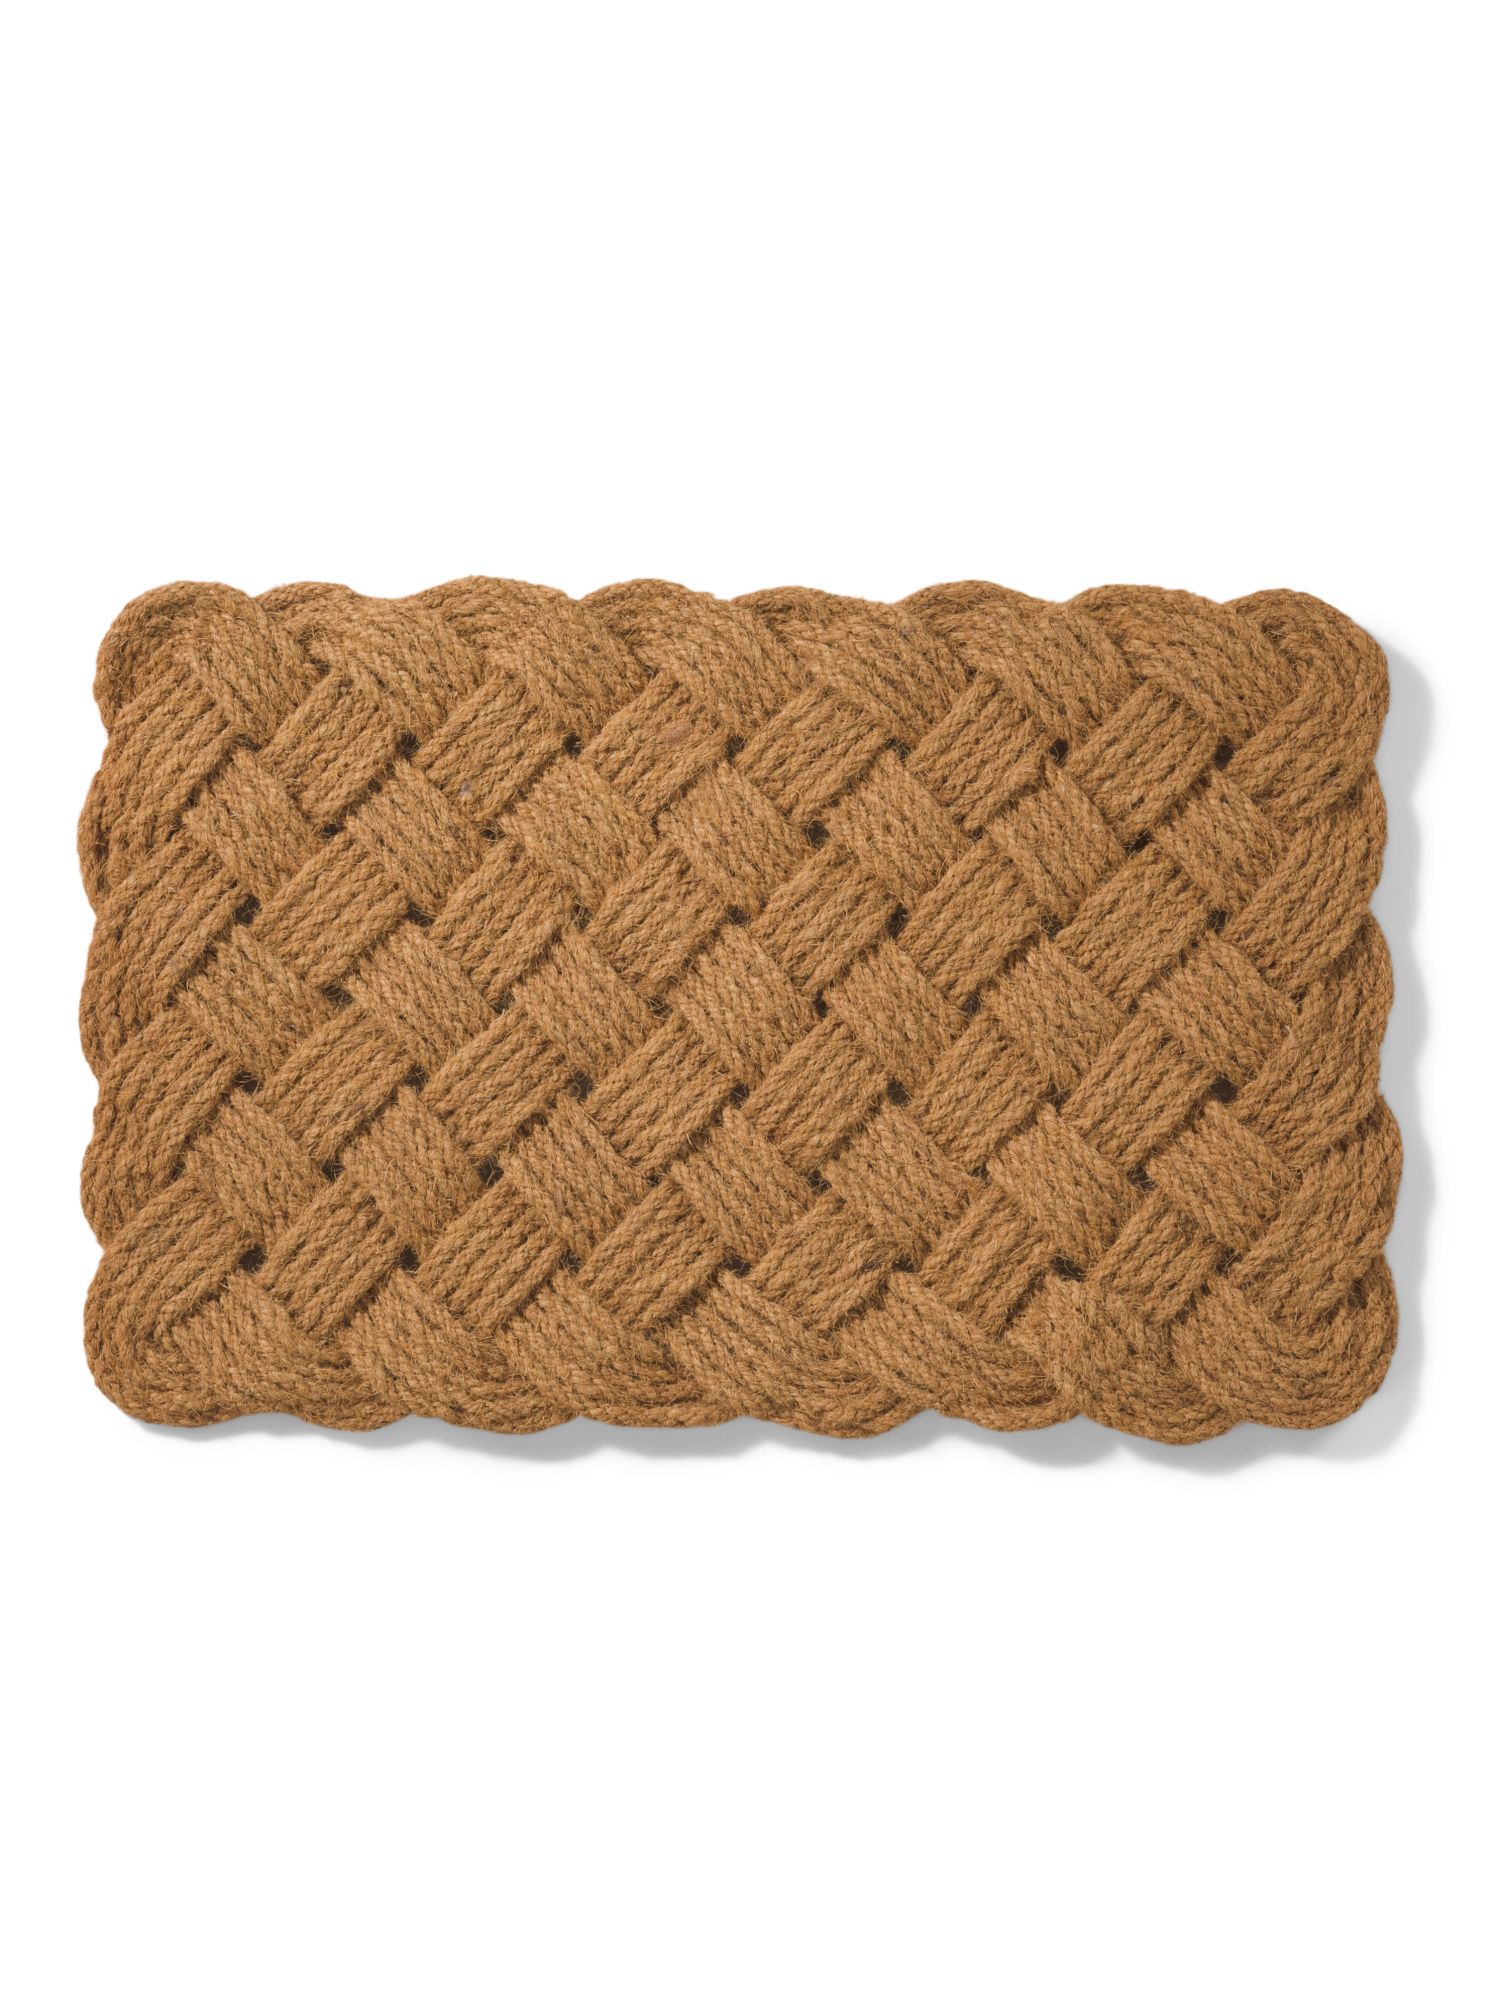 Natural Handwoven Knotted Rope Doormat | Marshalls